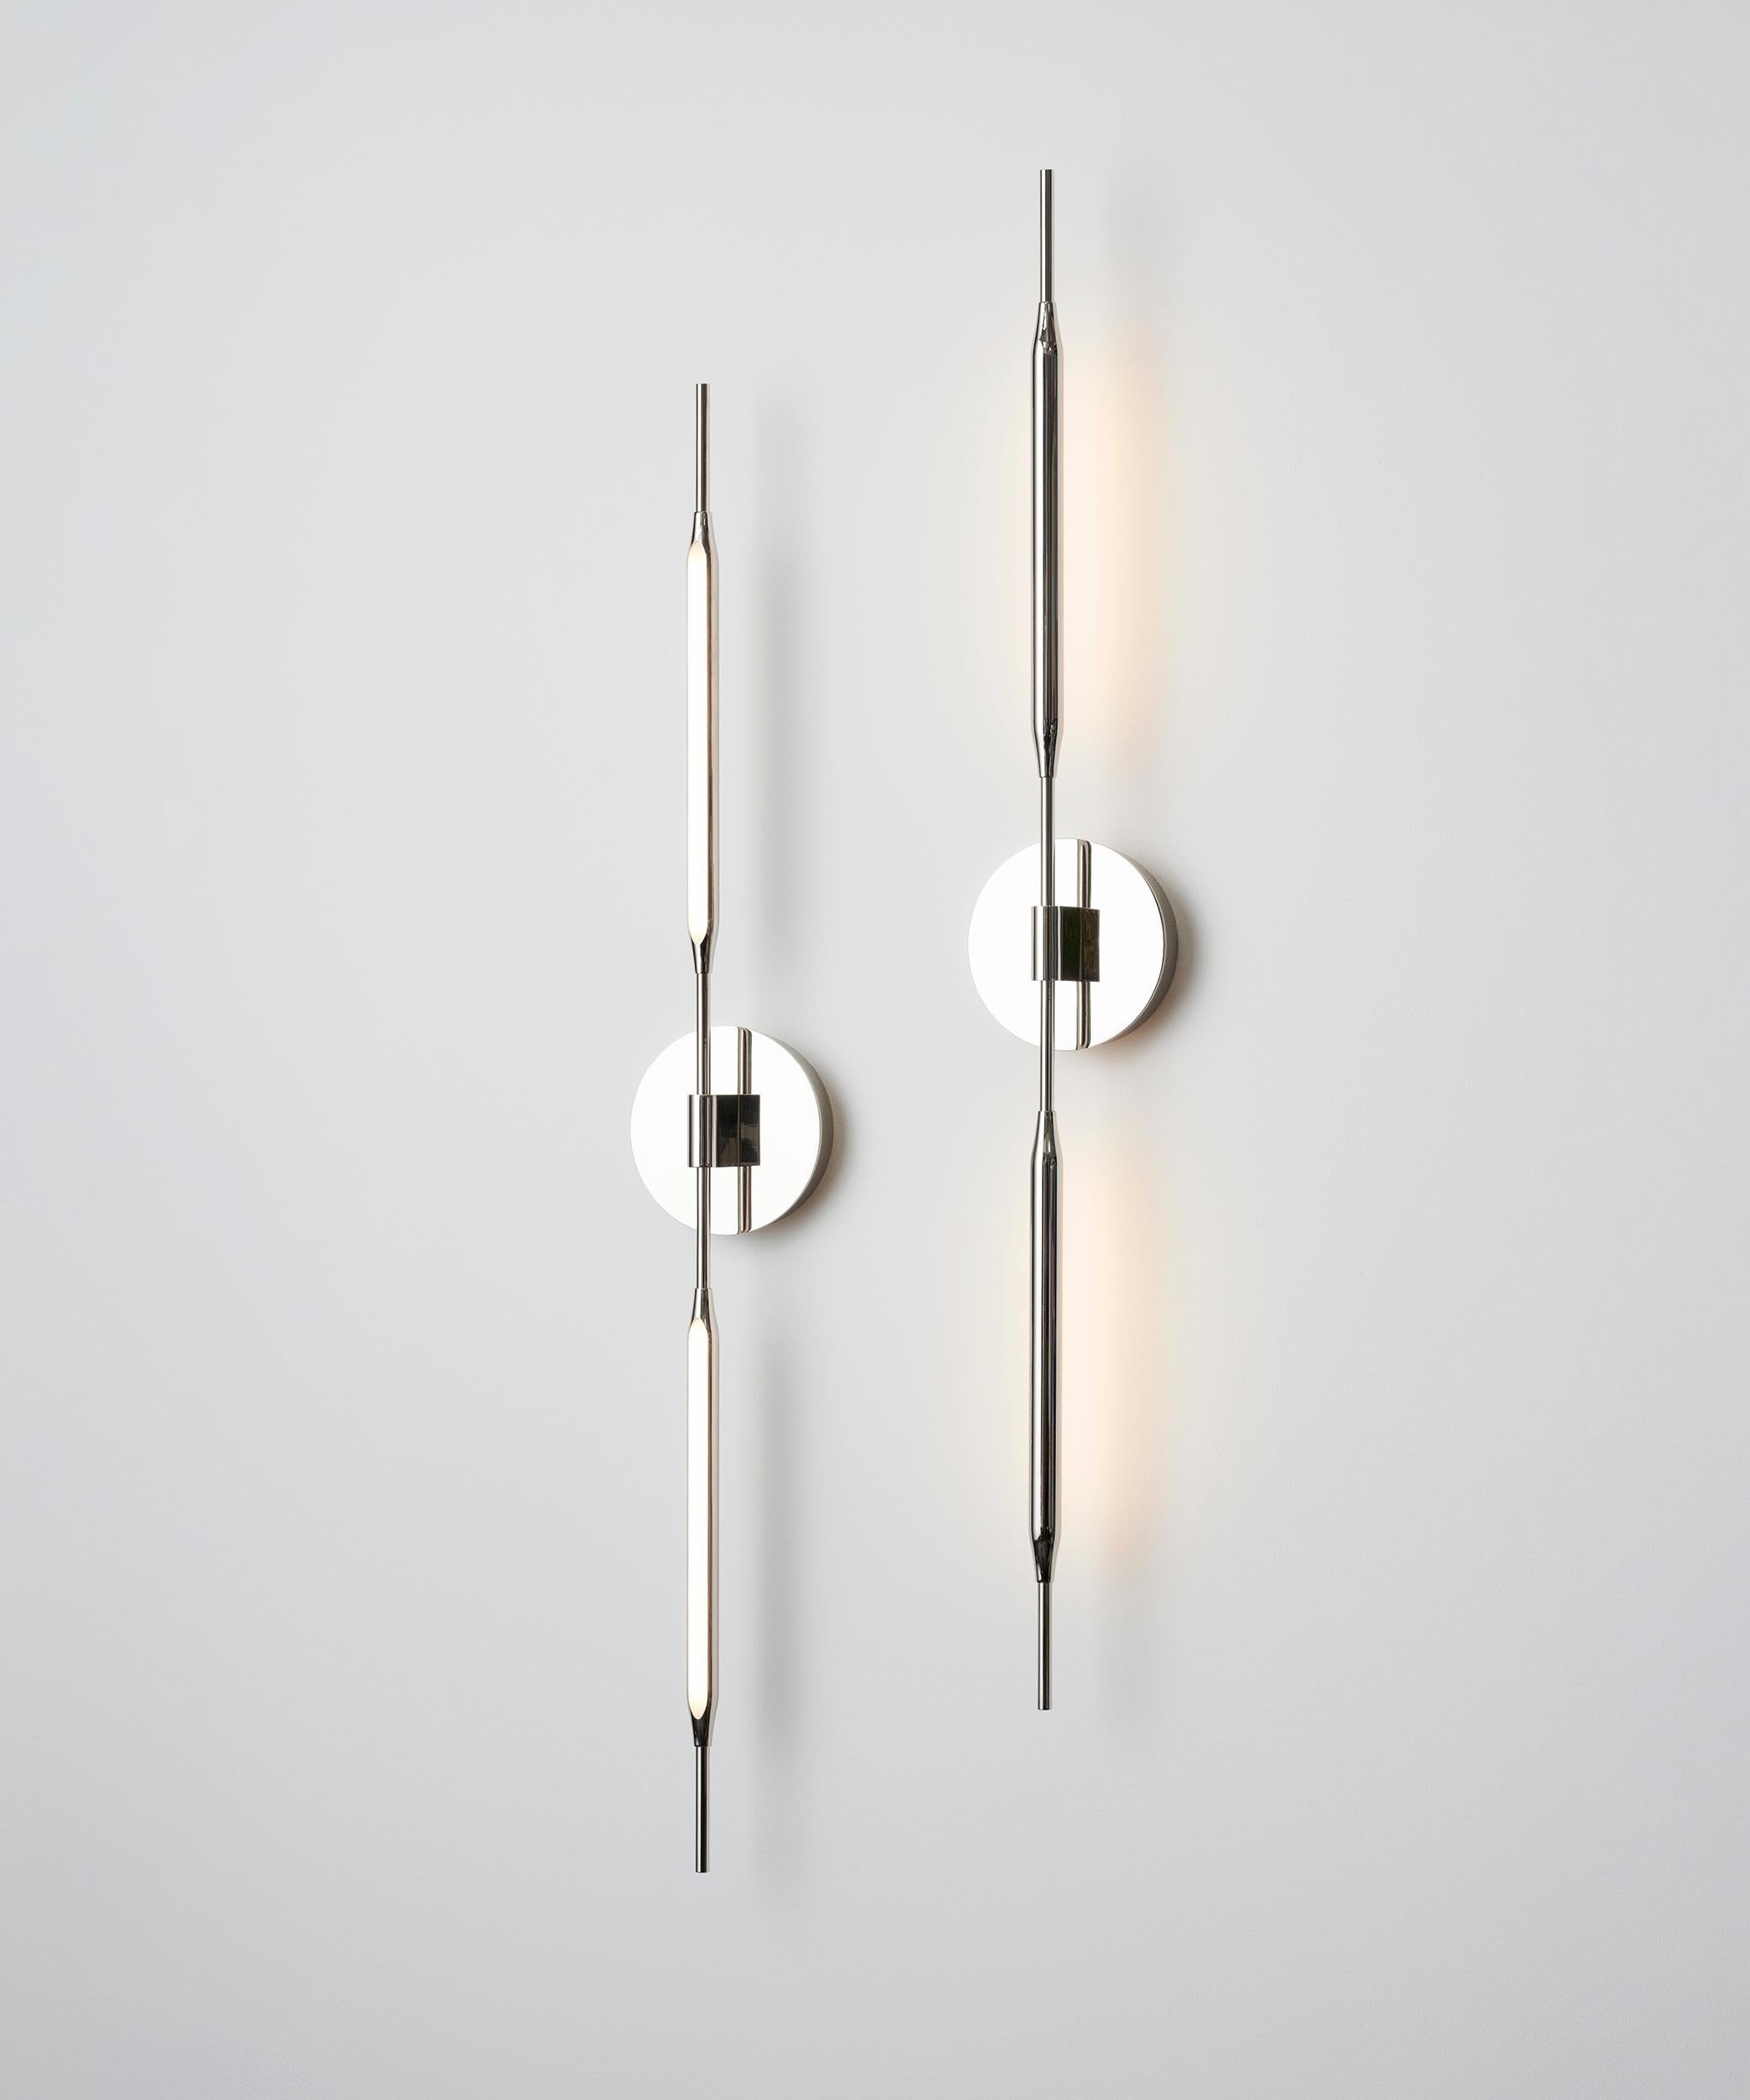 Inspired by slender, natural forms, the Reed Wall Lights are designed to deliver soft accents to an interior lighting scheme. Used in conjunction with the Reed portable luminaires, their versatility combines with a unique aesthetic. Precision